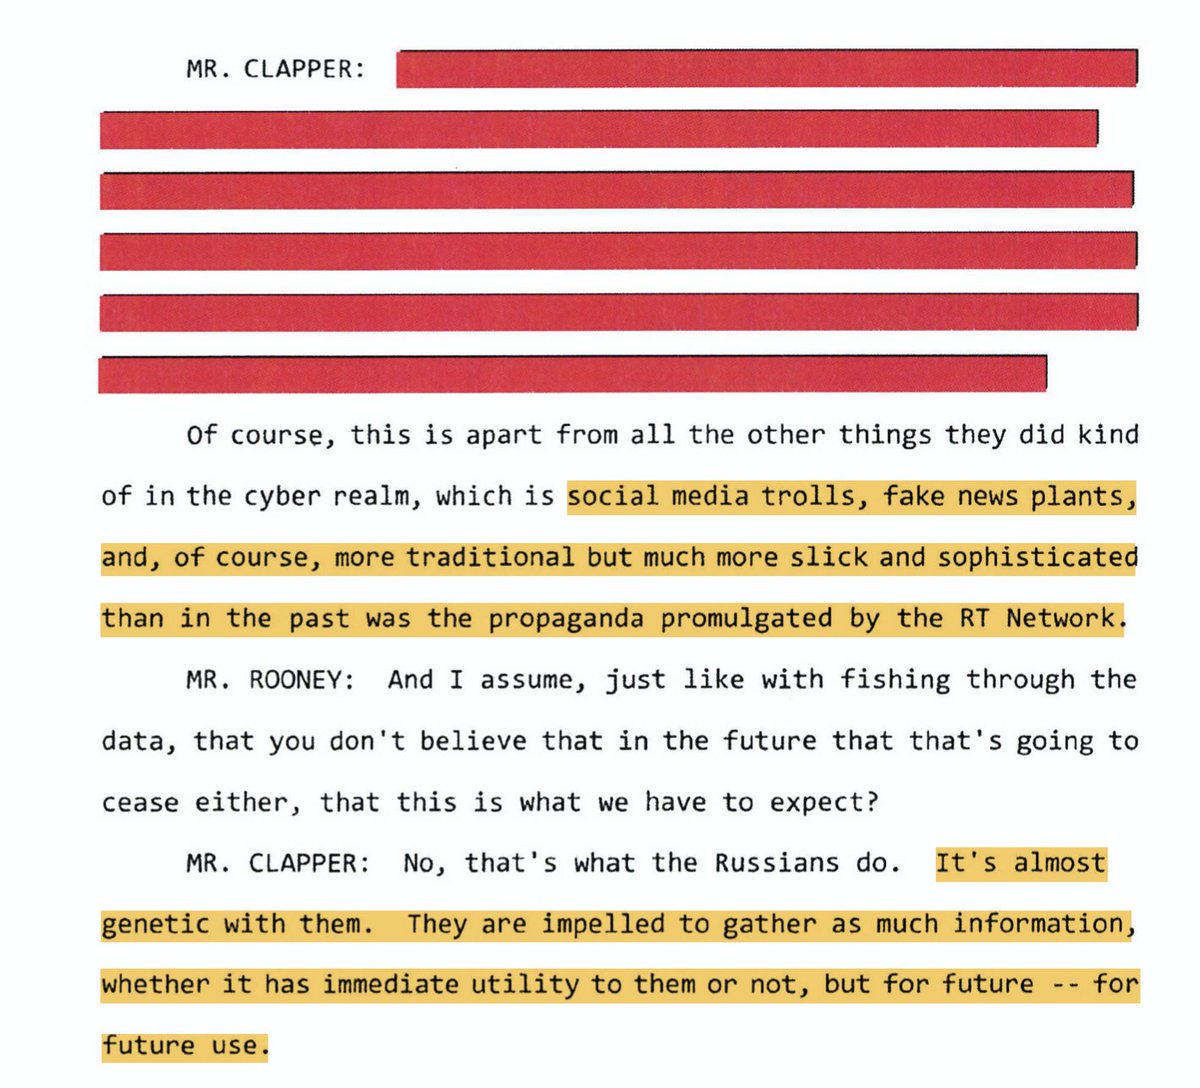 ROONEY: So the Russians will keep doing what Russians do.CLAPPER: Yes, but harder, since they're more sophisticated and they got Trump into the goddamned White House this way.